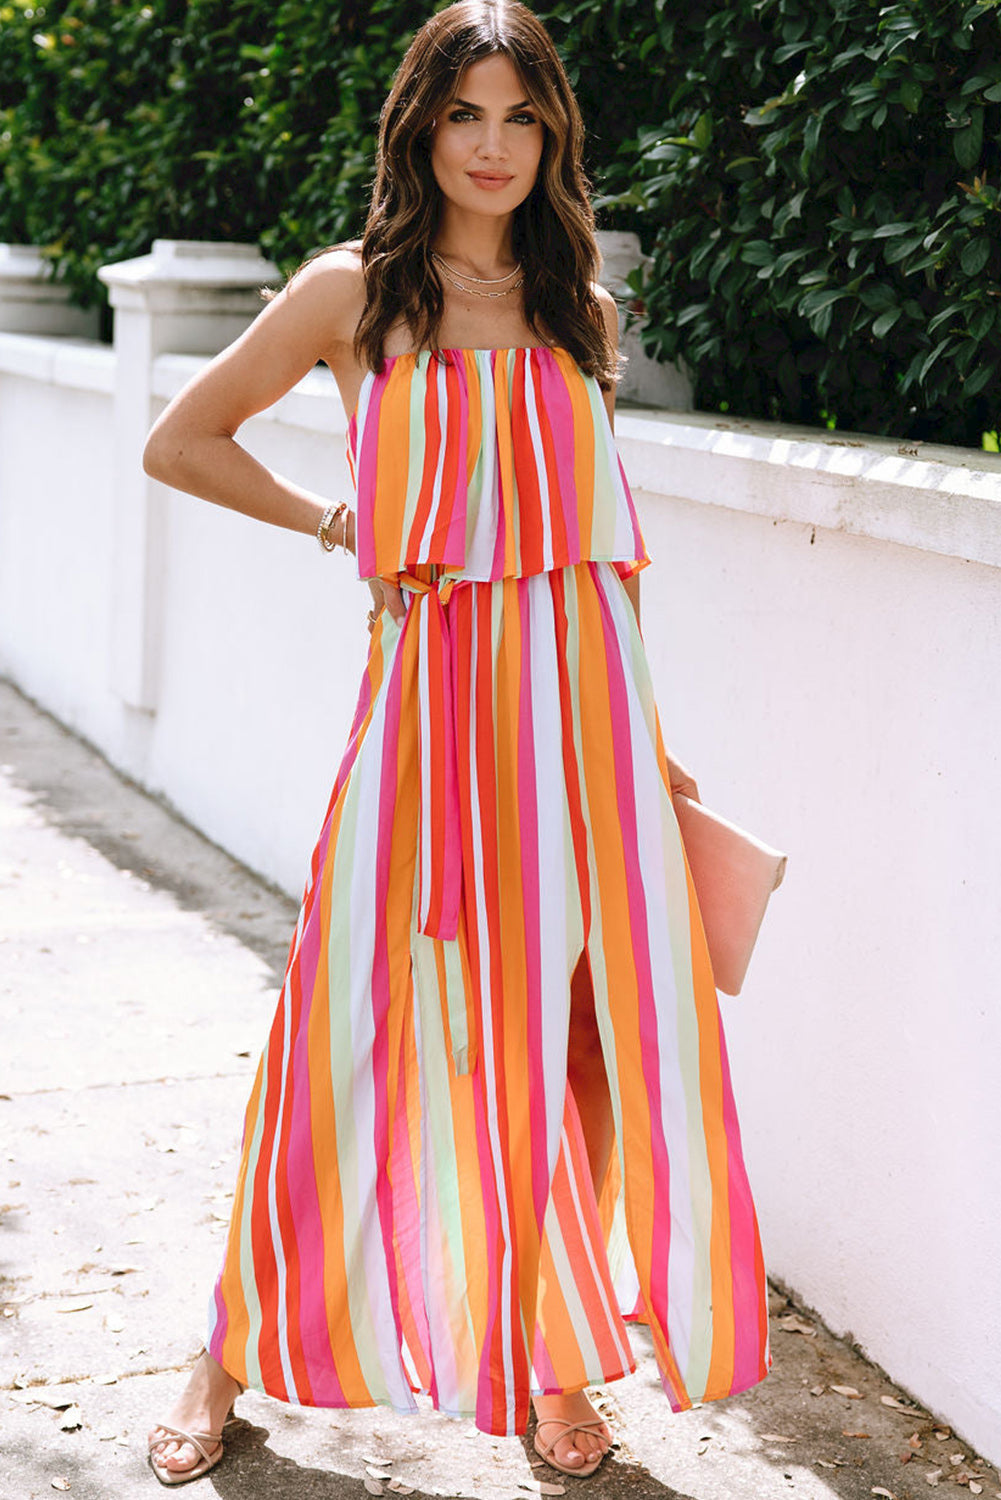 Stripe Overlay Strapless Maxi Dress with Slits